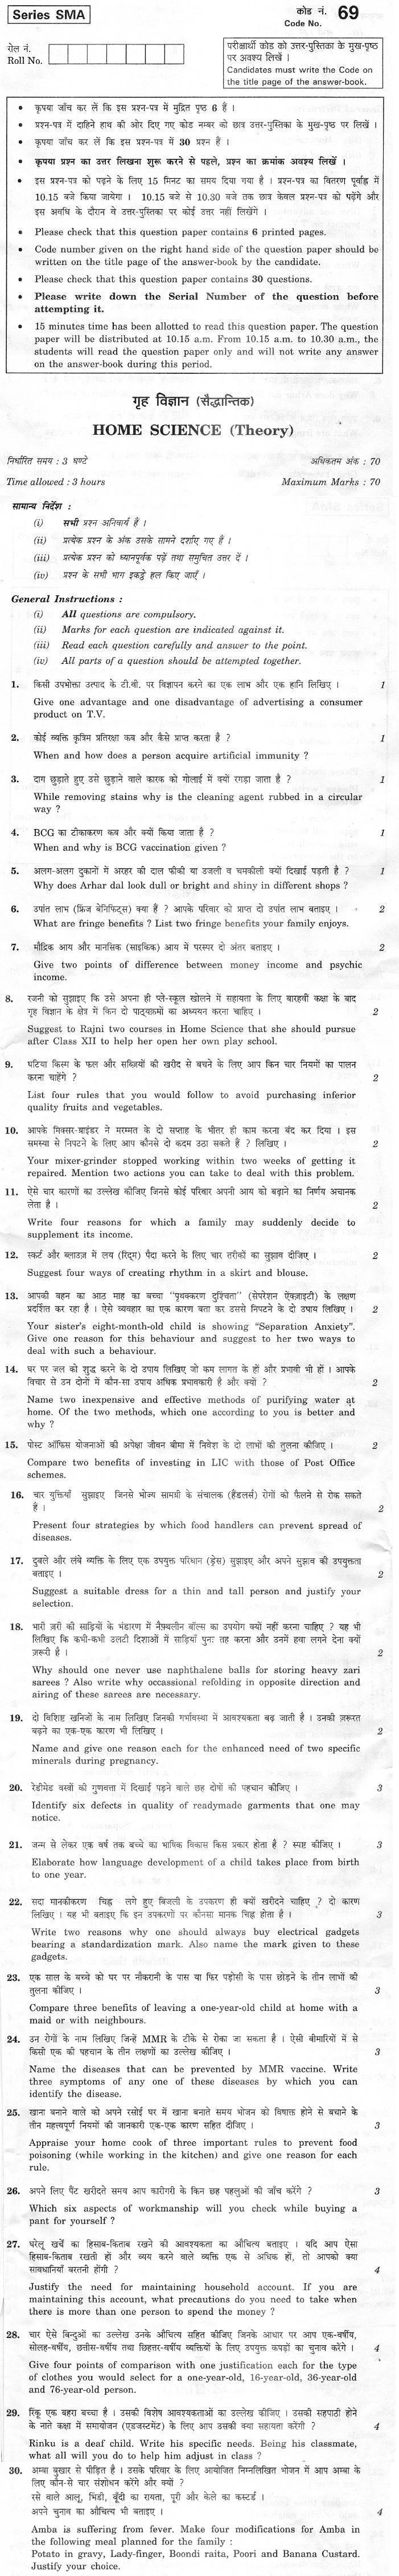 CBSE Class XII Previous Year Question Paper 2012 Home Science